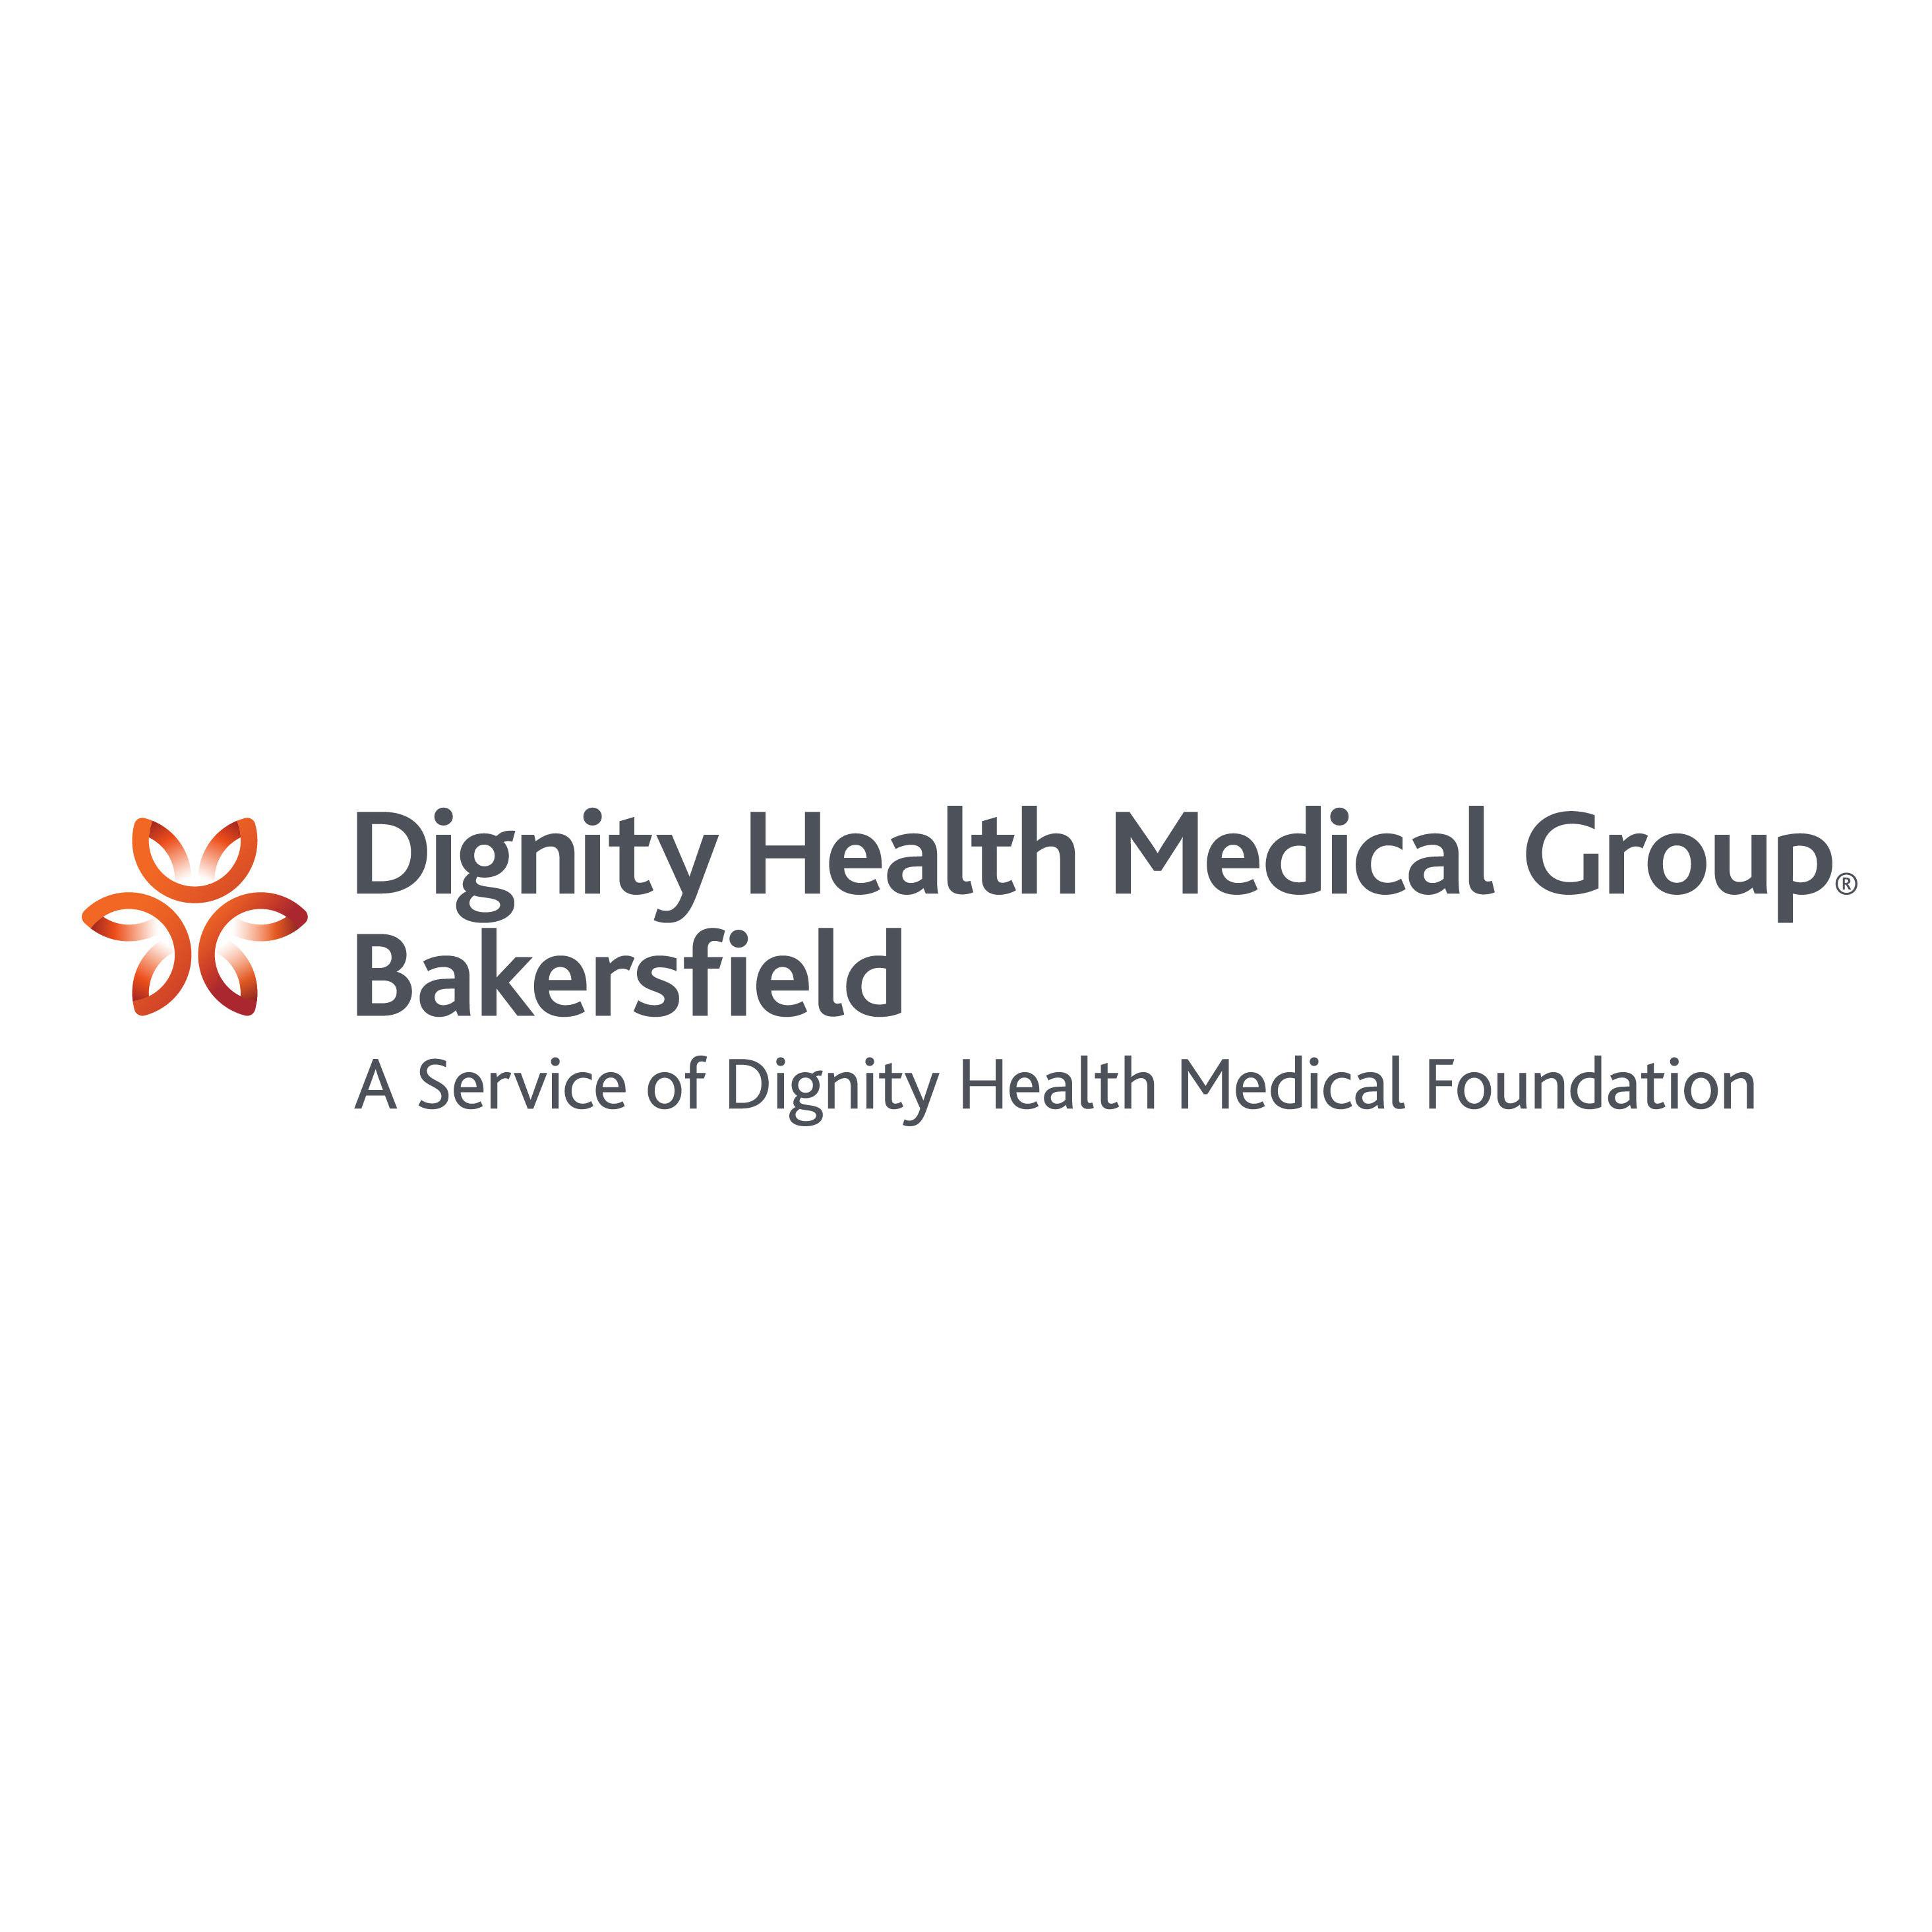 Dignity Health Medical Group - Bakersfield (family medicine and endocrinology)